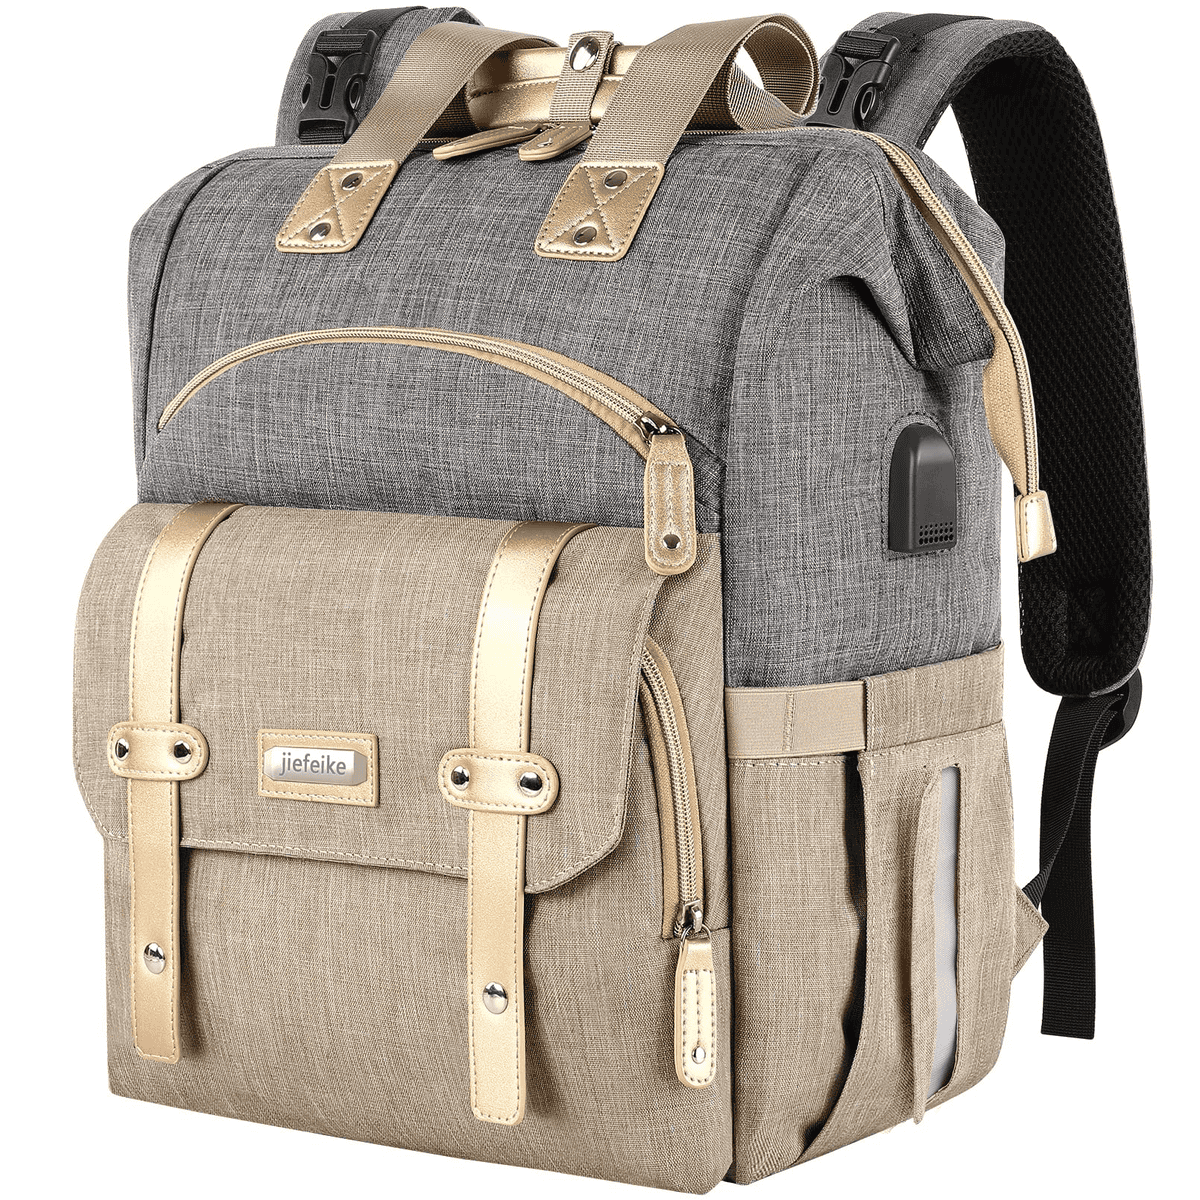 Jiefeike Diaper bag backpack image from Amazon